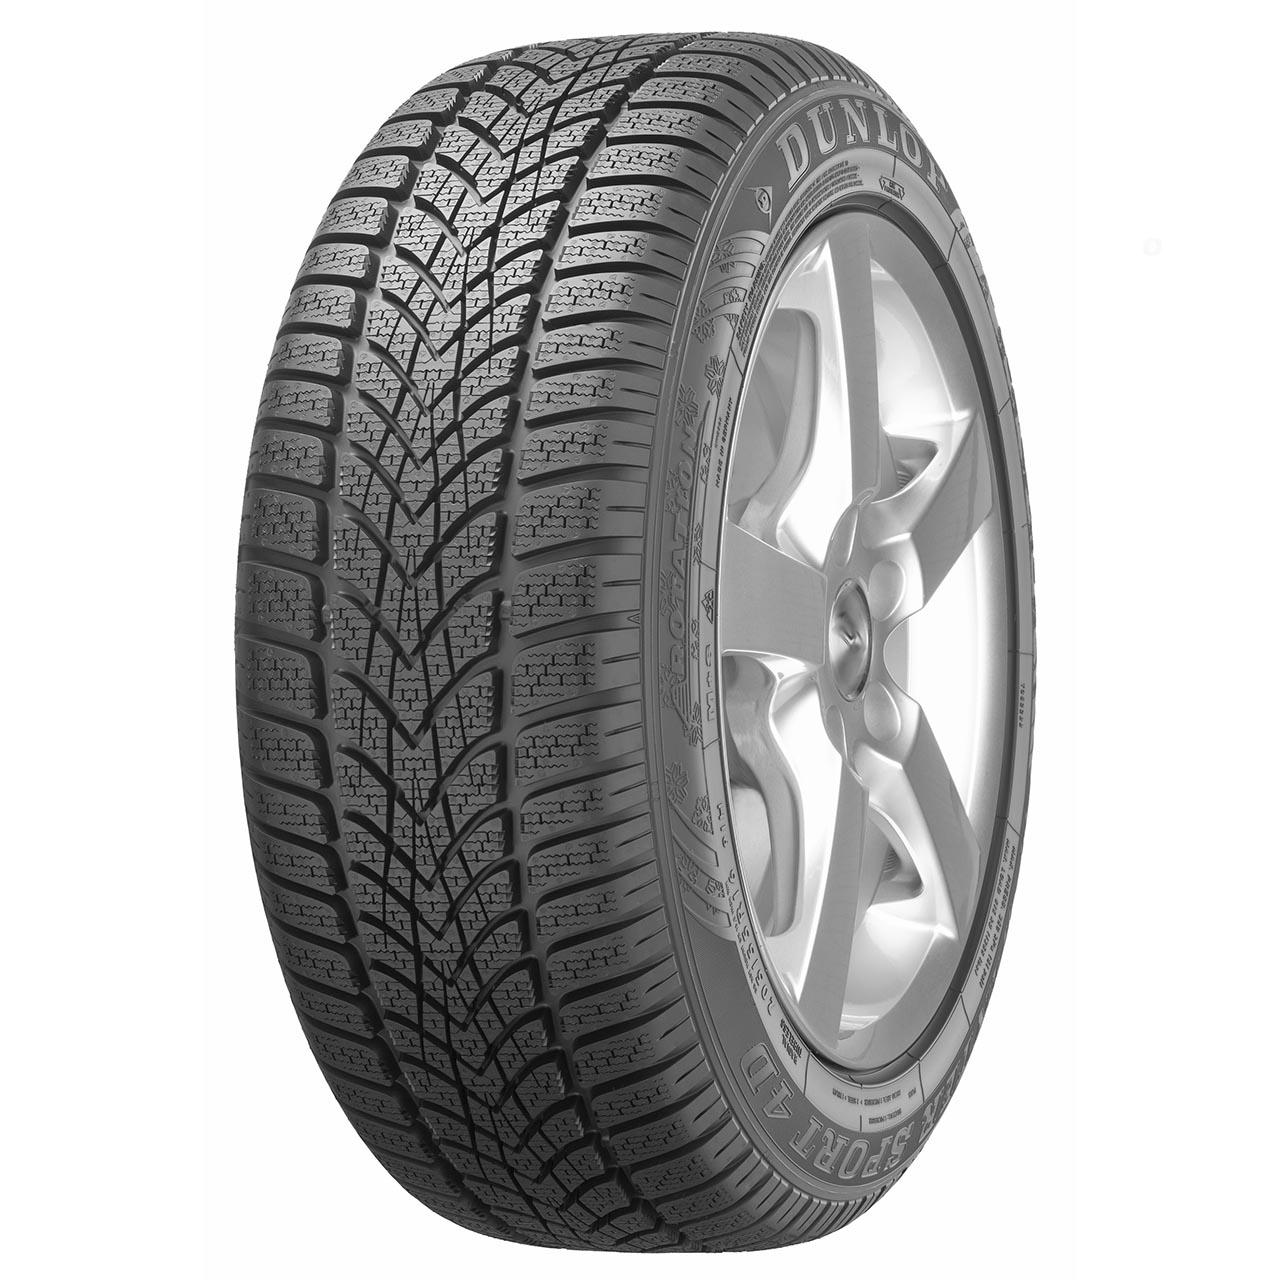 Gomme Nuove Dunlop 235/45 R17 94H WIN4D MO MFS M+S pneumatici nuovi Invernale